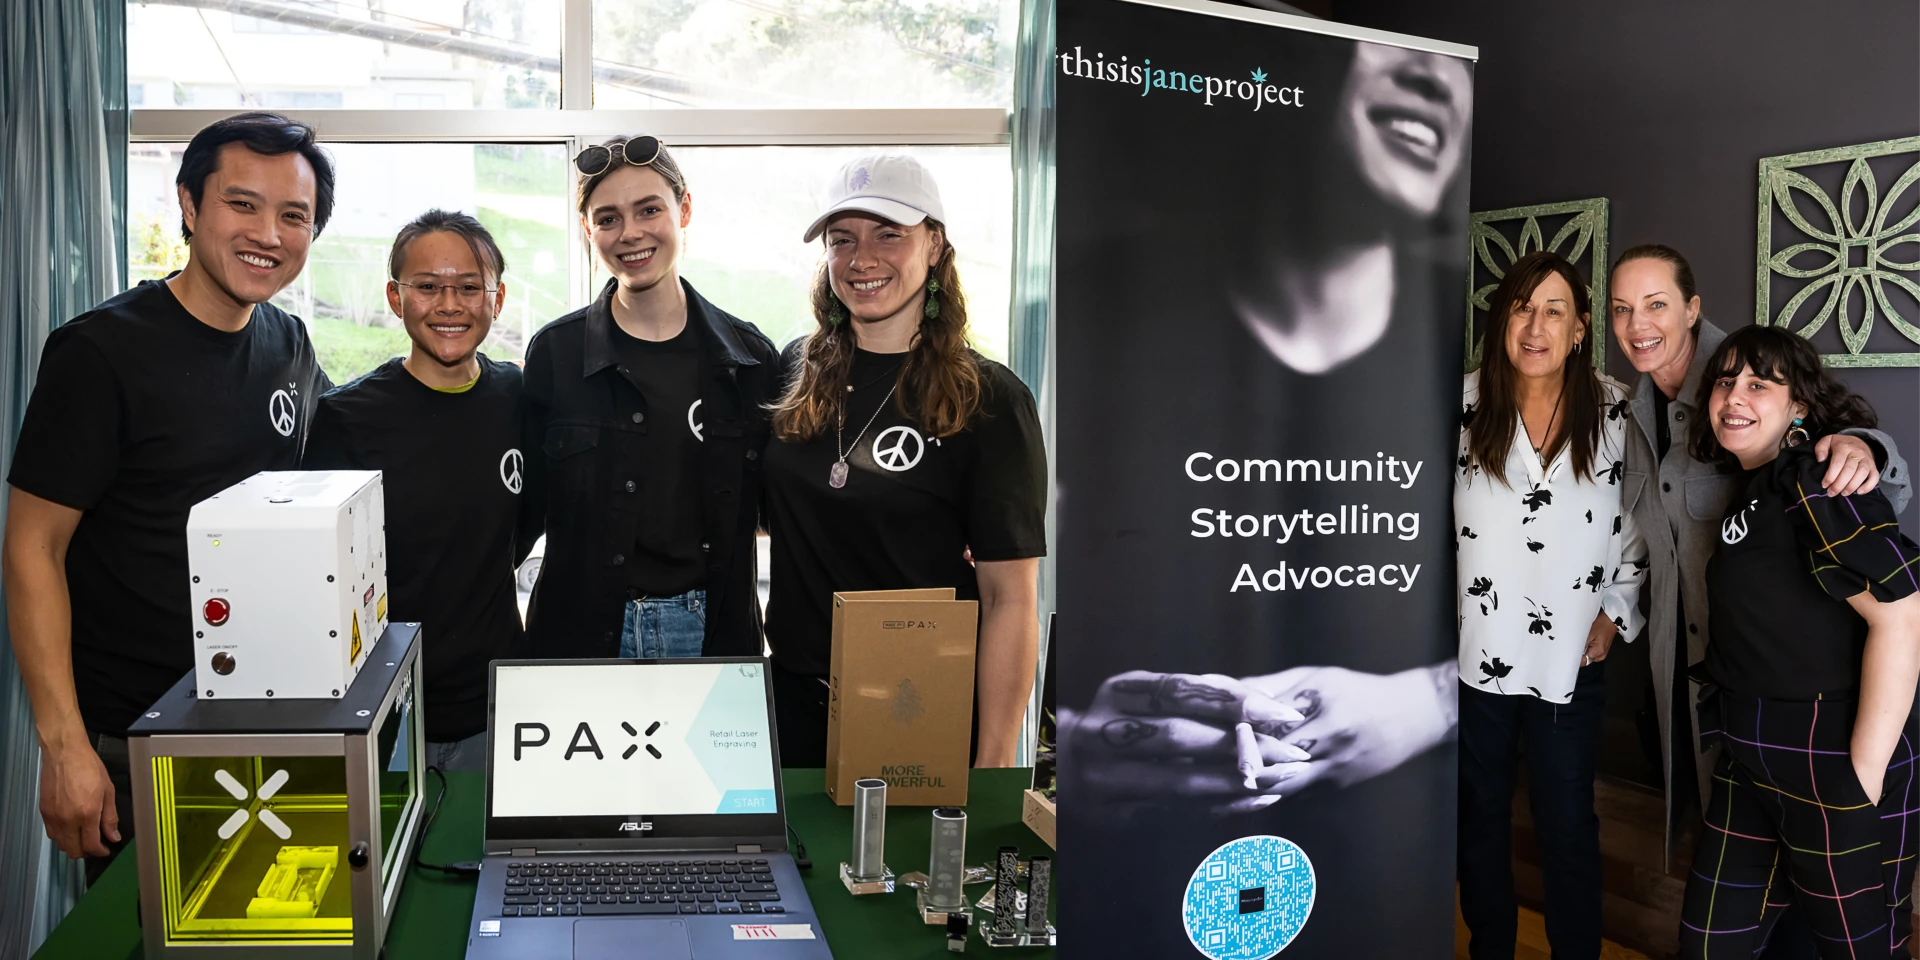 PAX team at Posh Green for Pax's Day of Peace event 